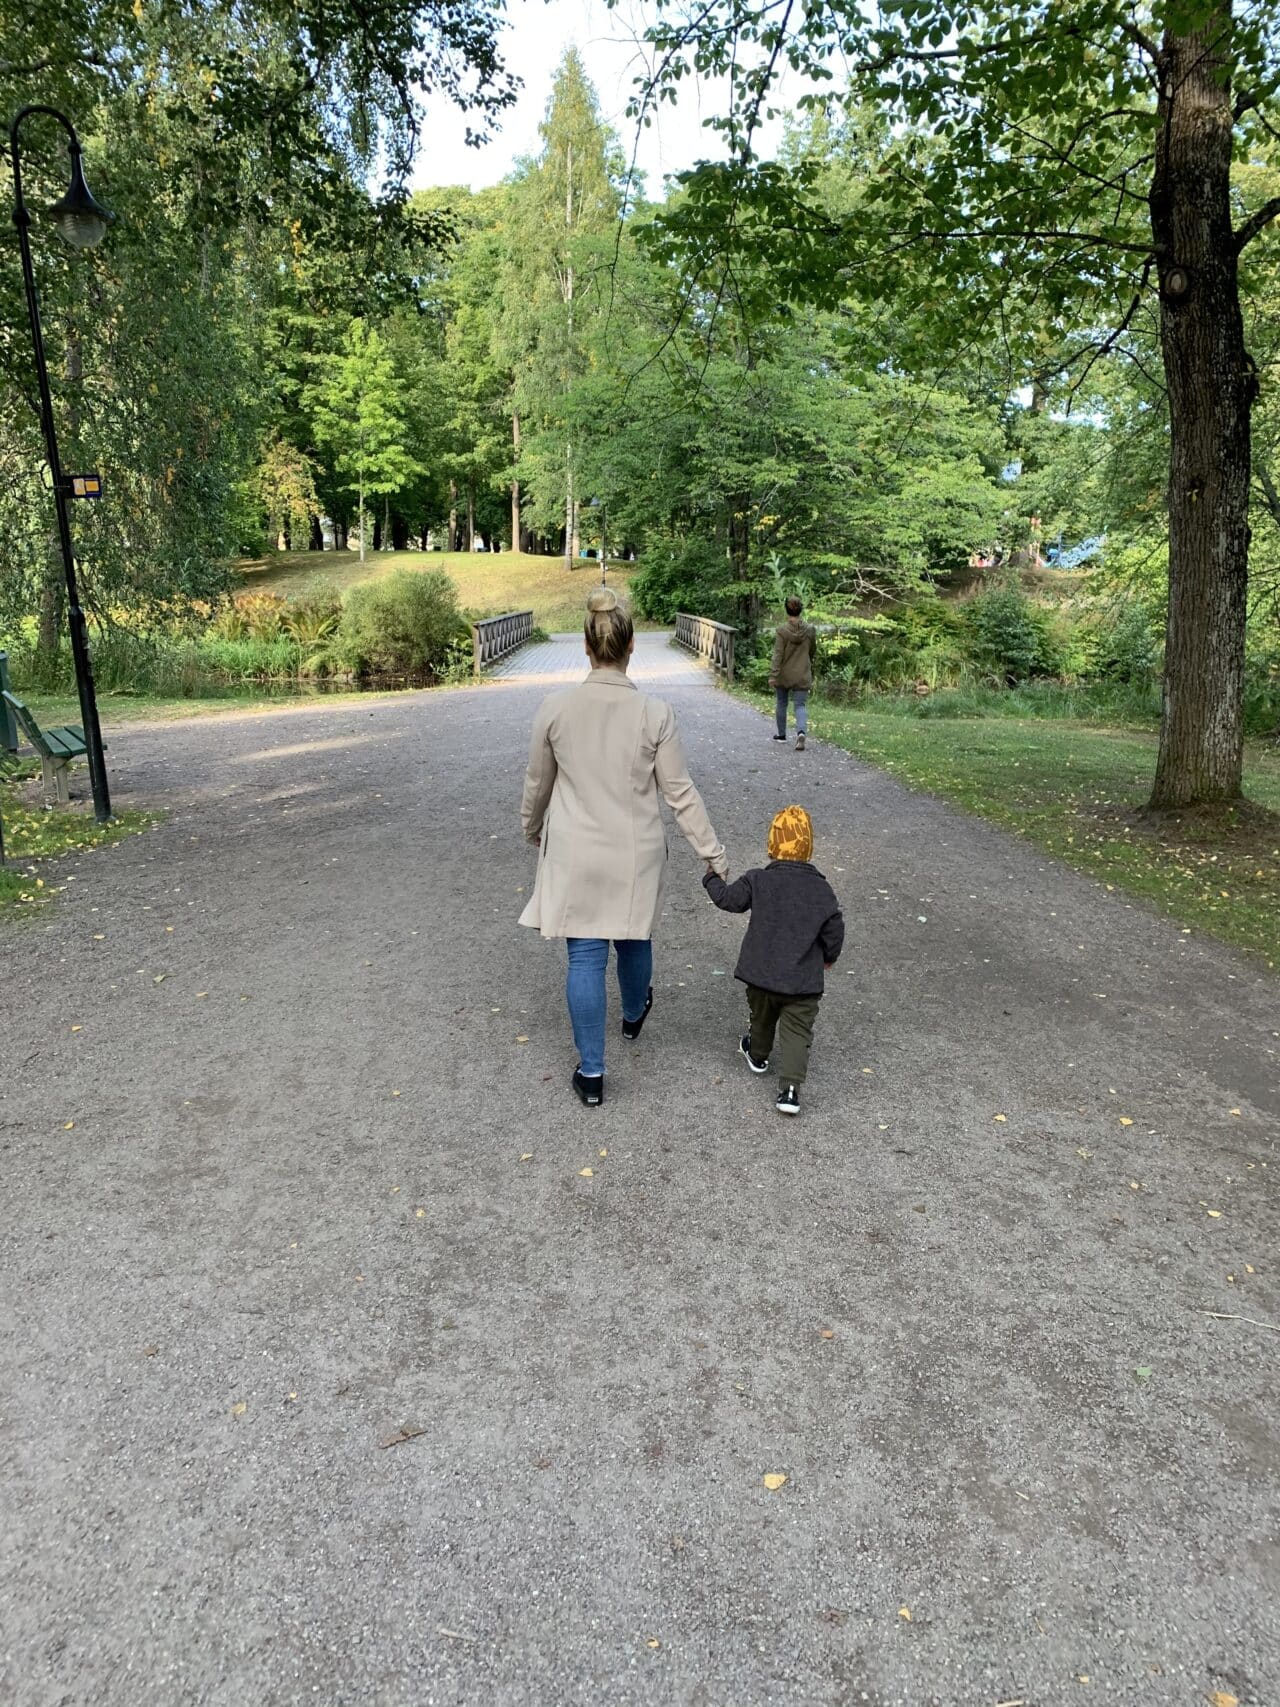 Mother Holding Child And Walking On Gravel Path In Park